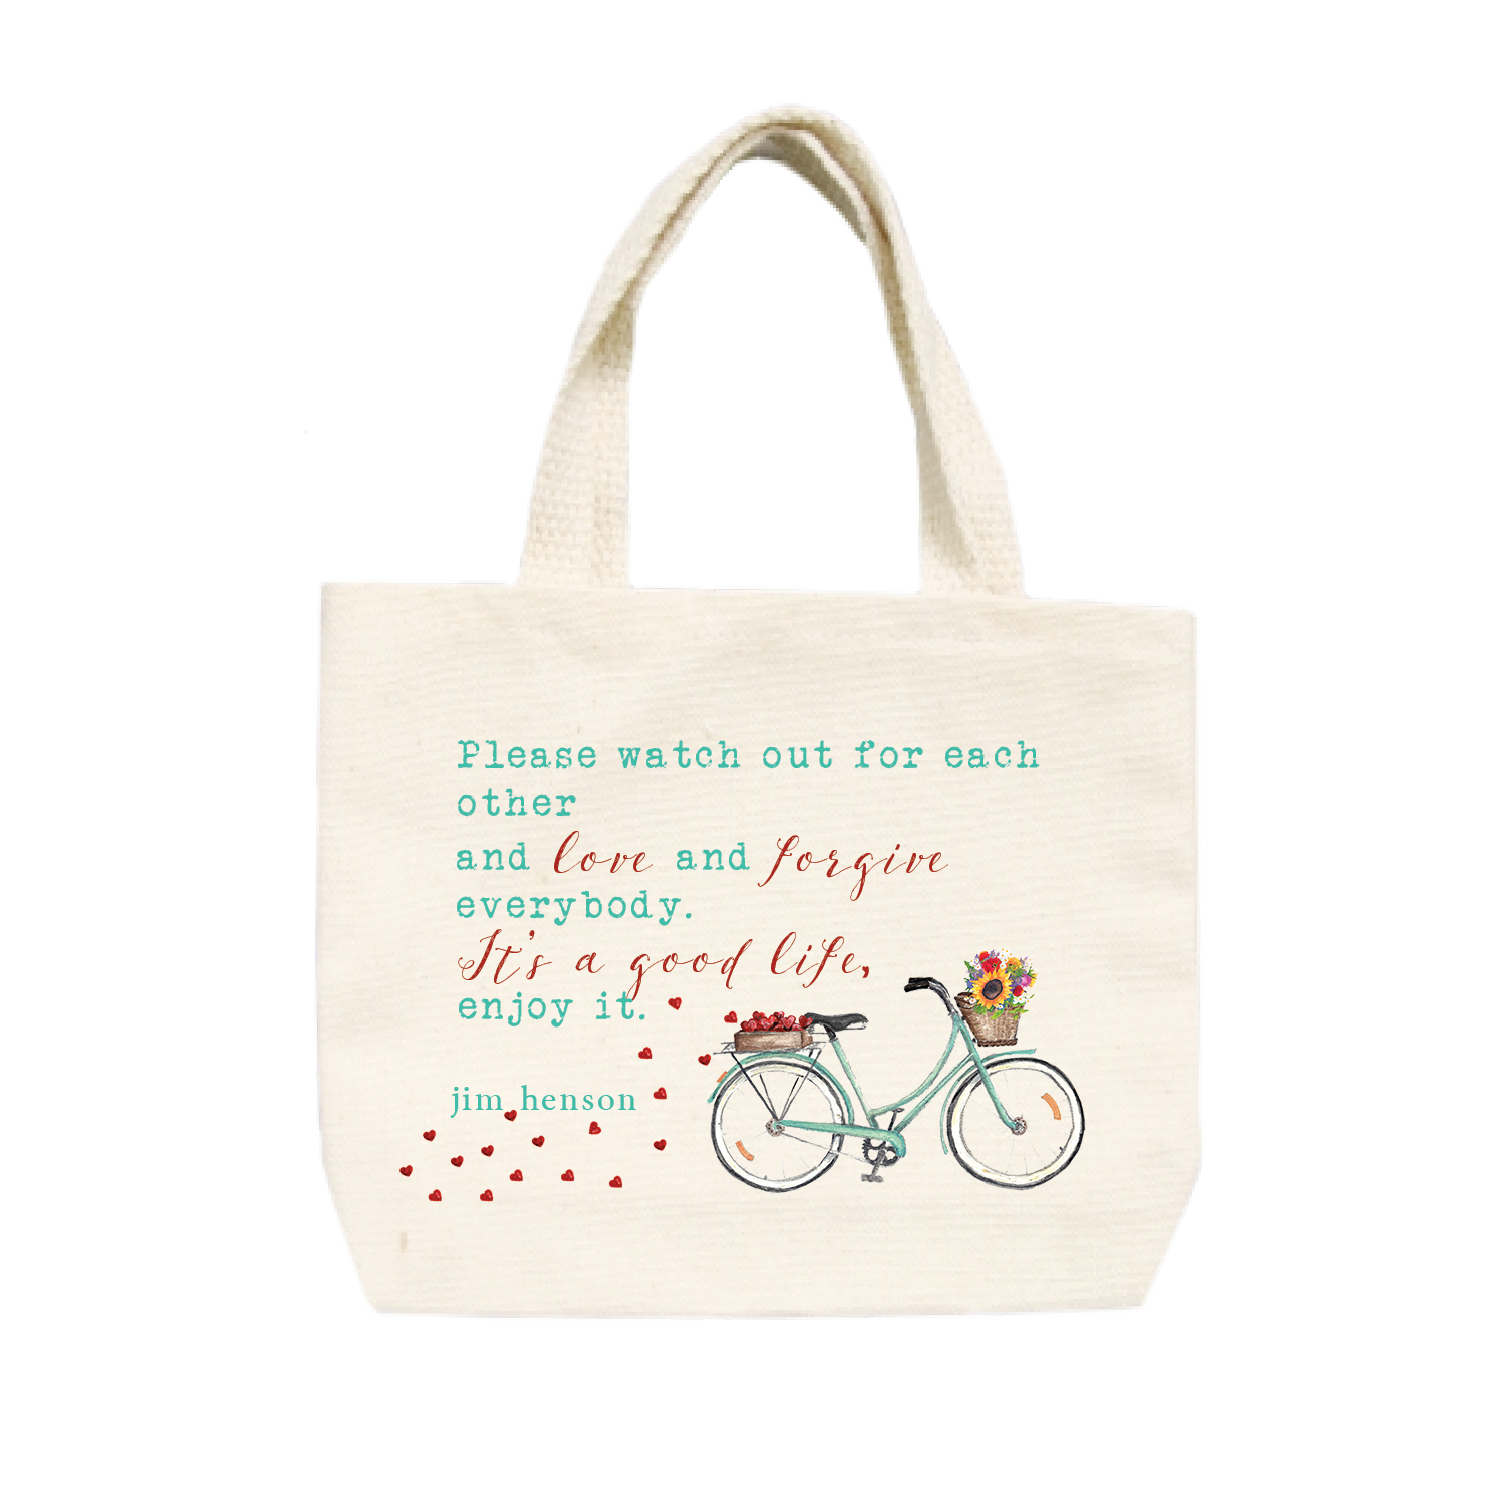 wildflower bike with jim henson quote small tote